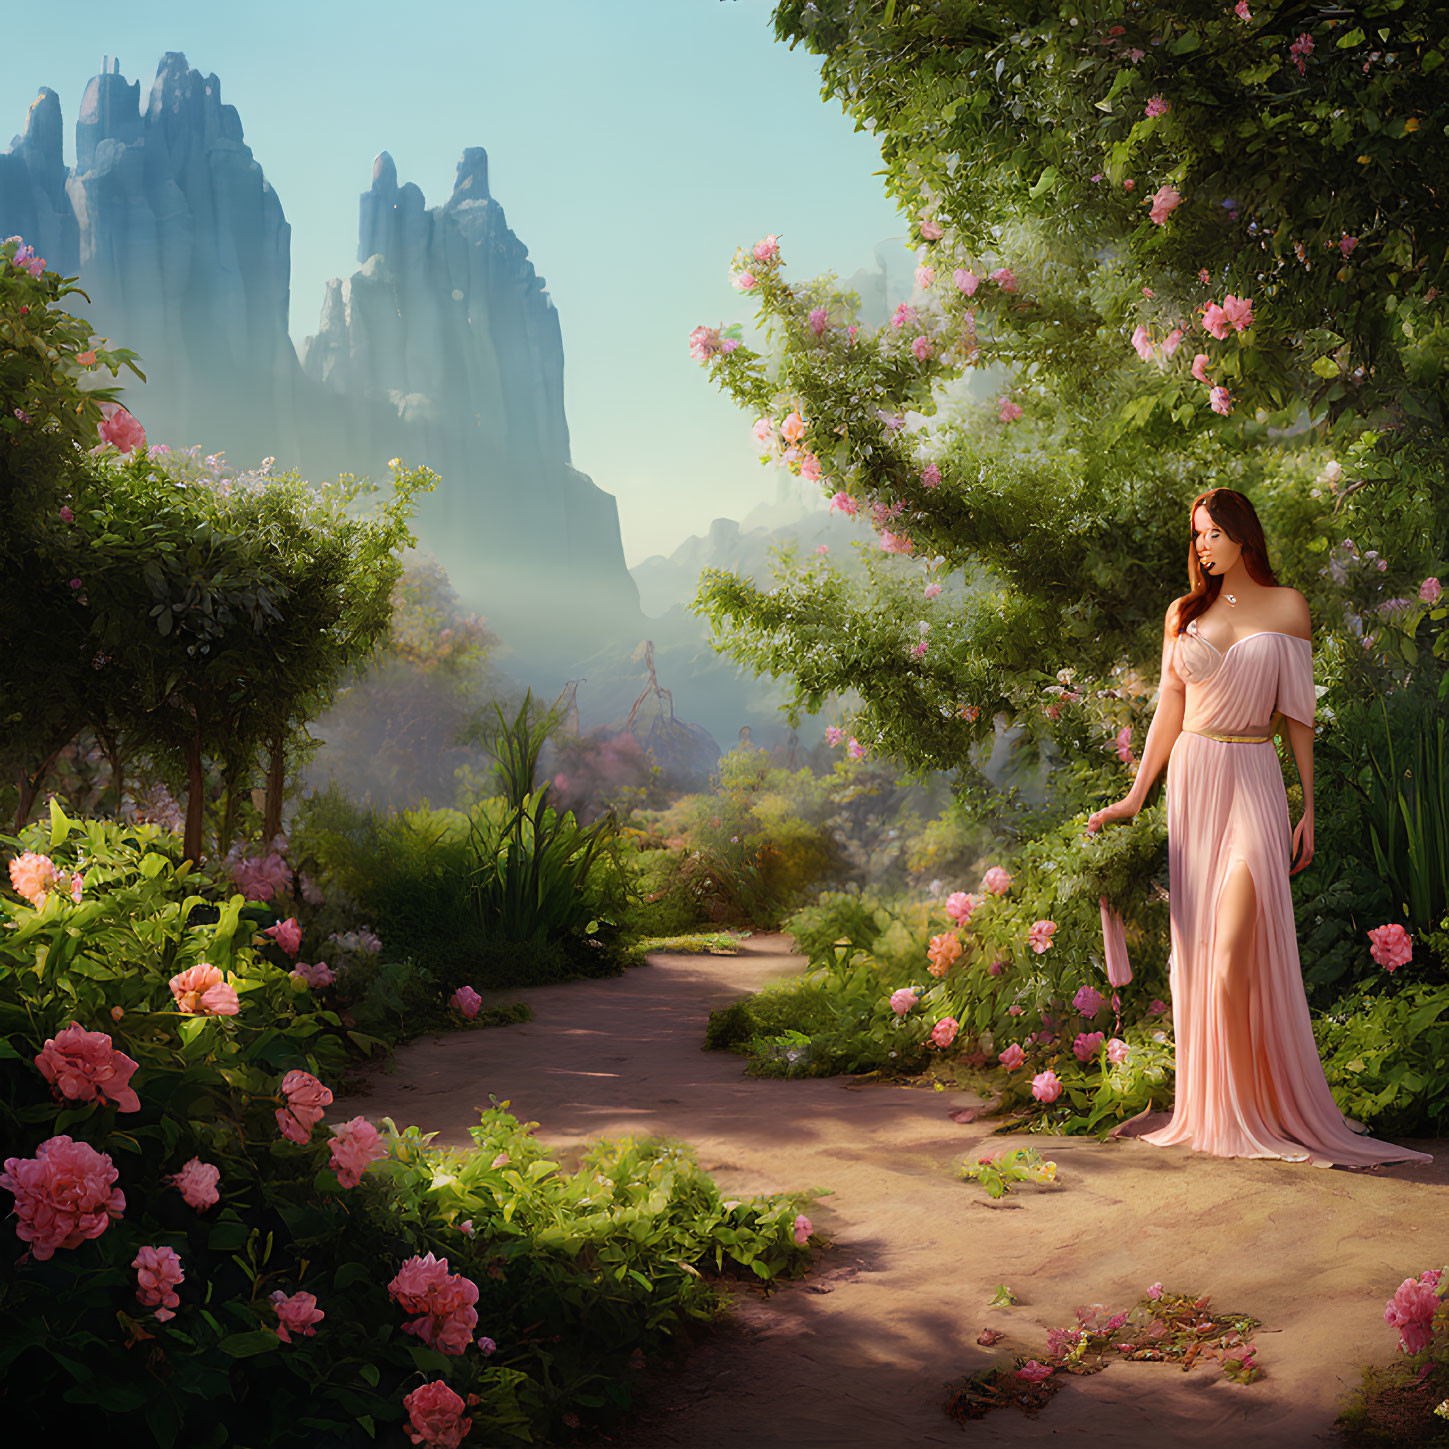 Woman in Flowing Dress Surrounded by Garden Path and Mountains